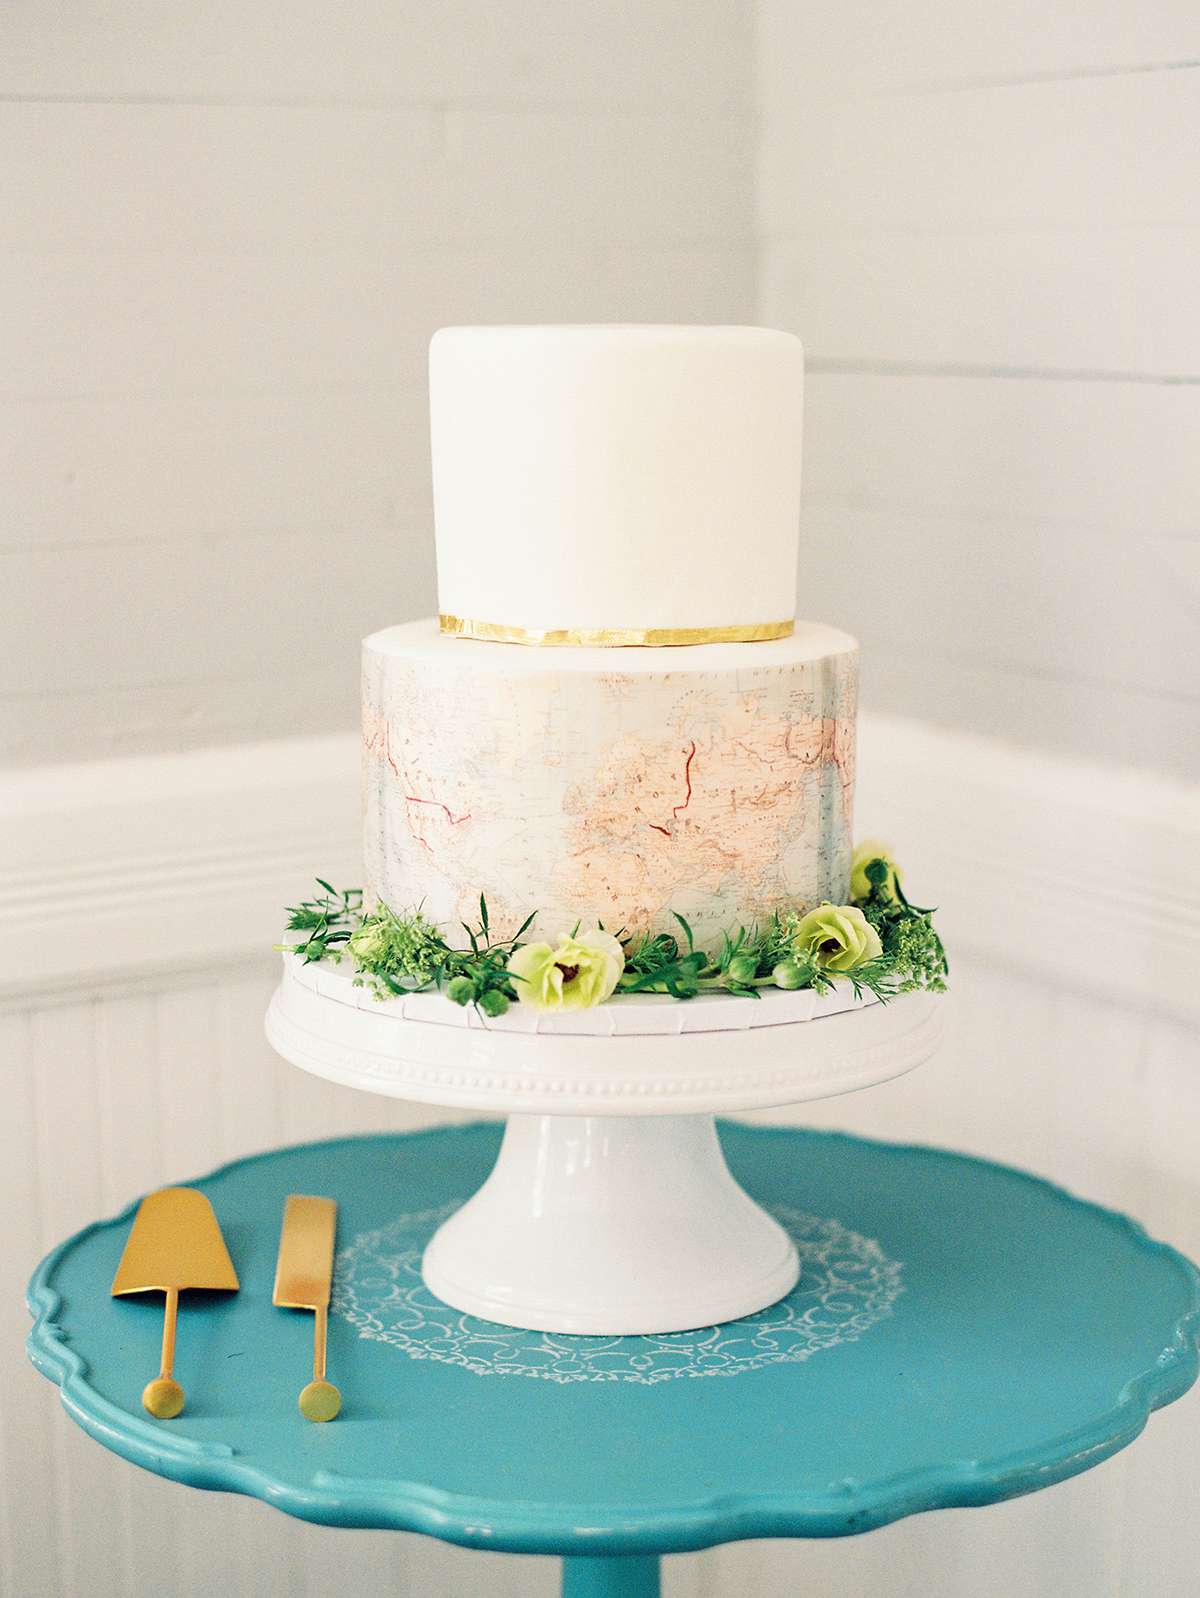 wedding cake with map design on the bottom tier